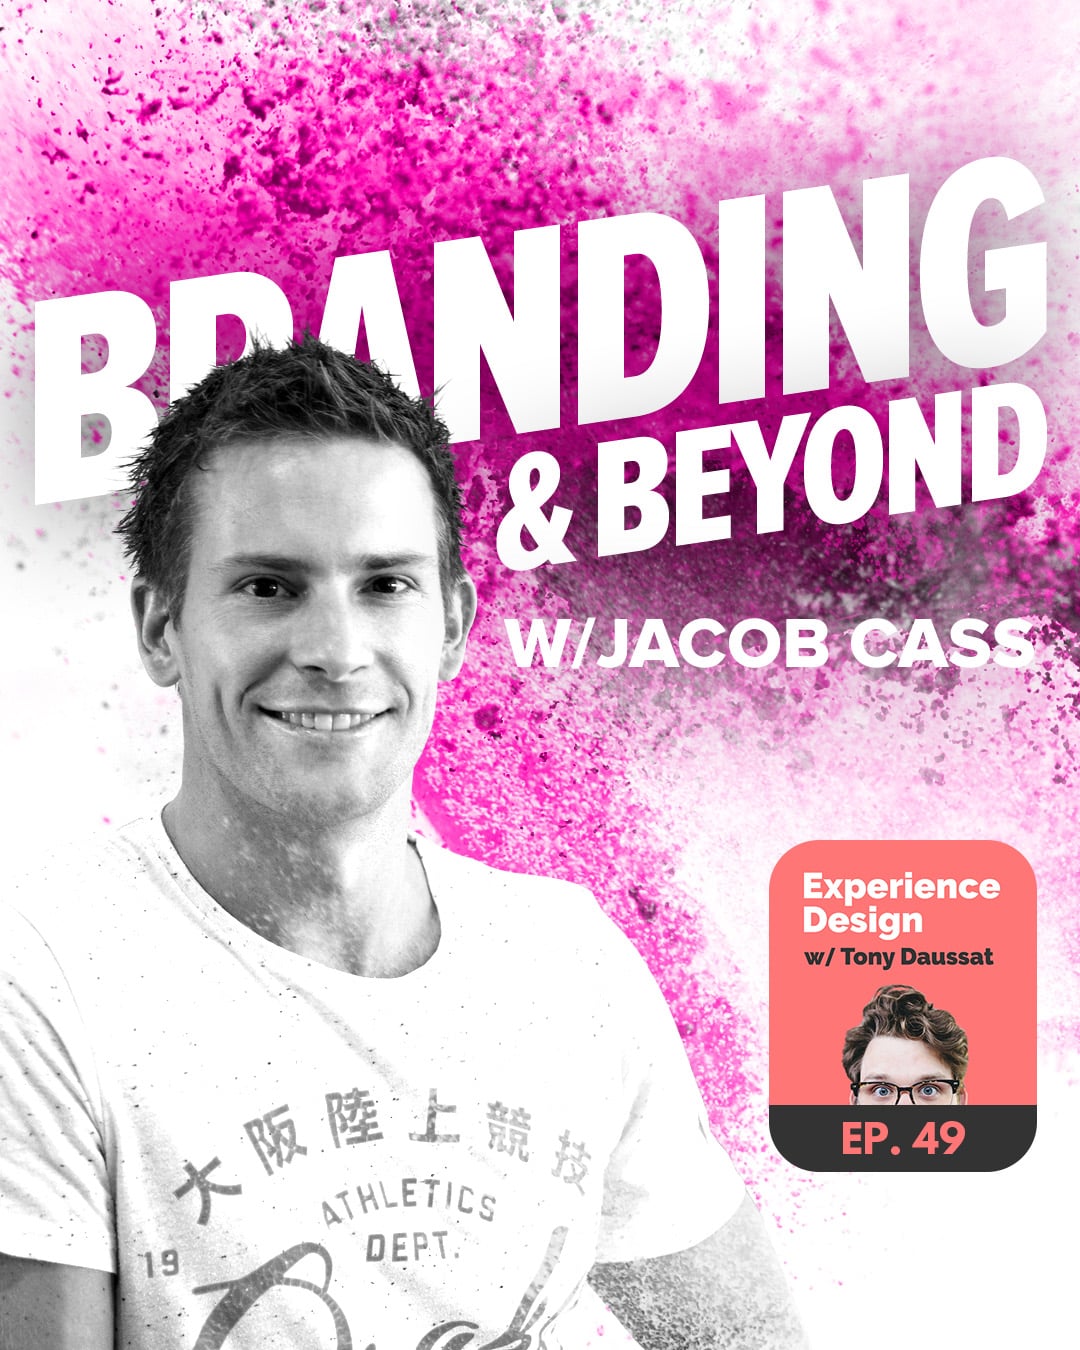 Beyond Branding Podcast with Jacob Cass on XDPodcast